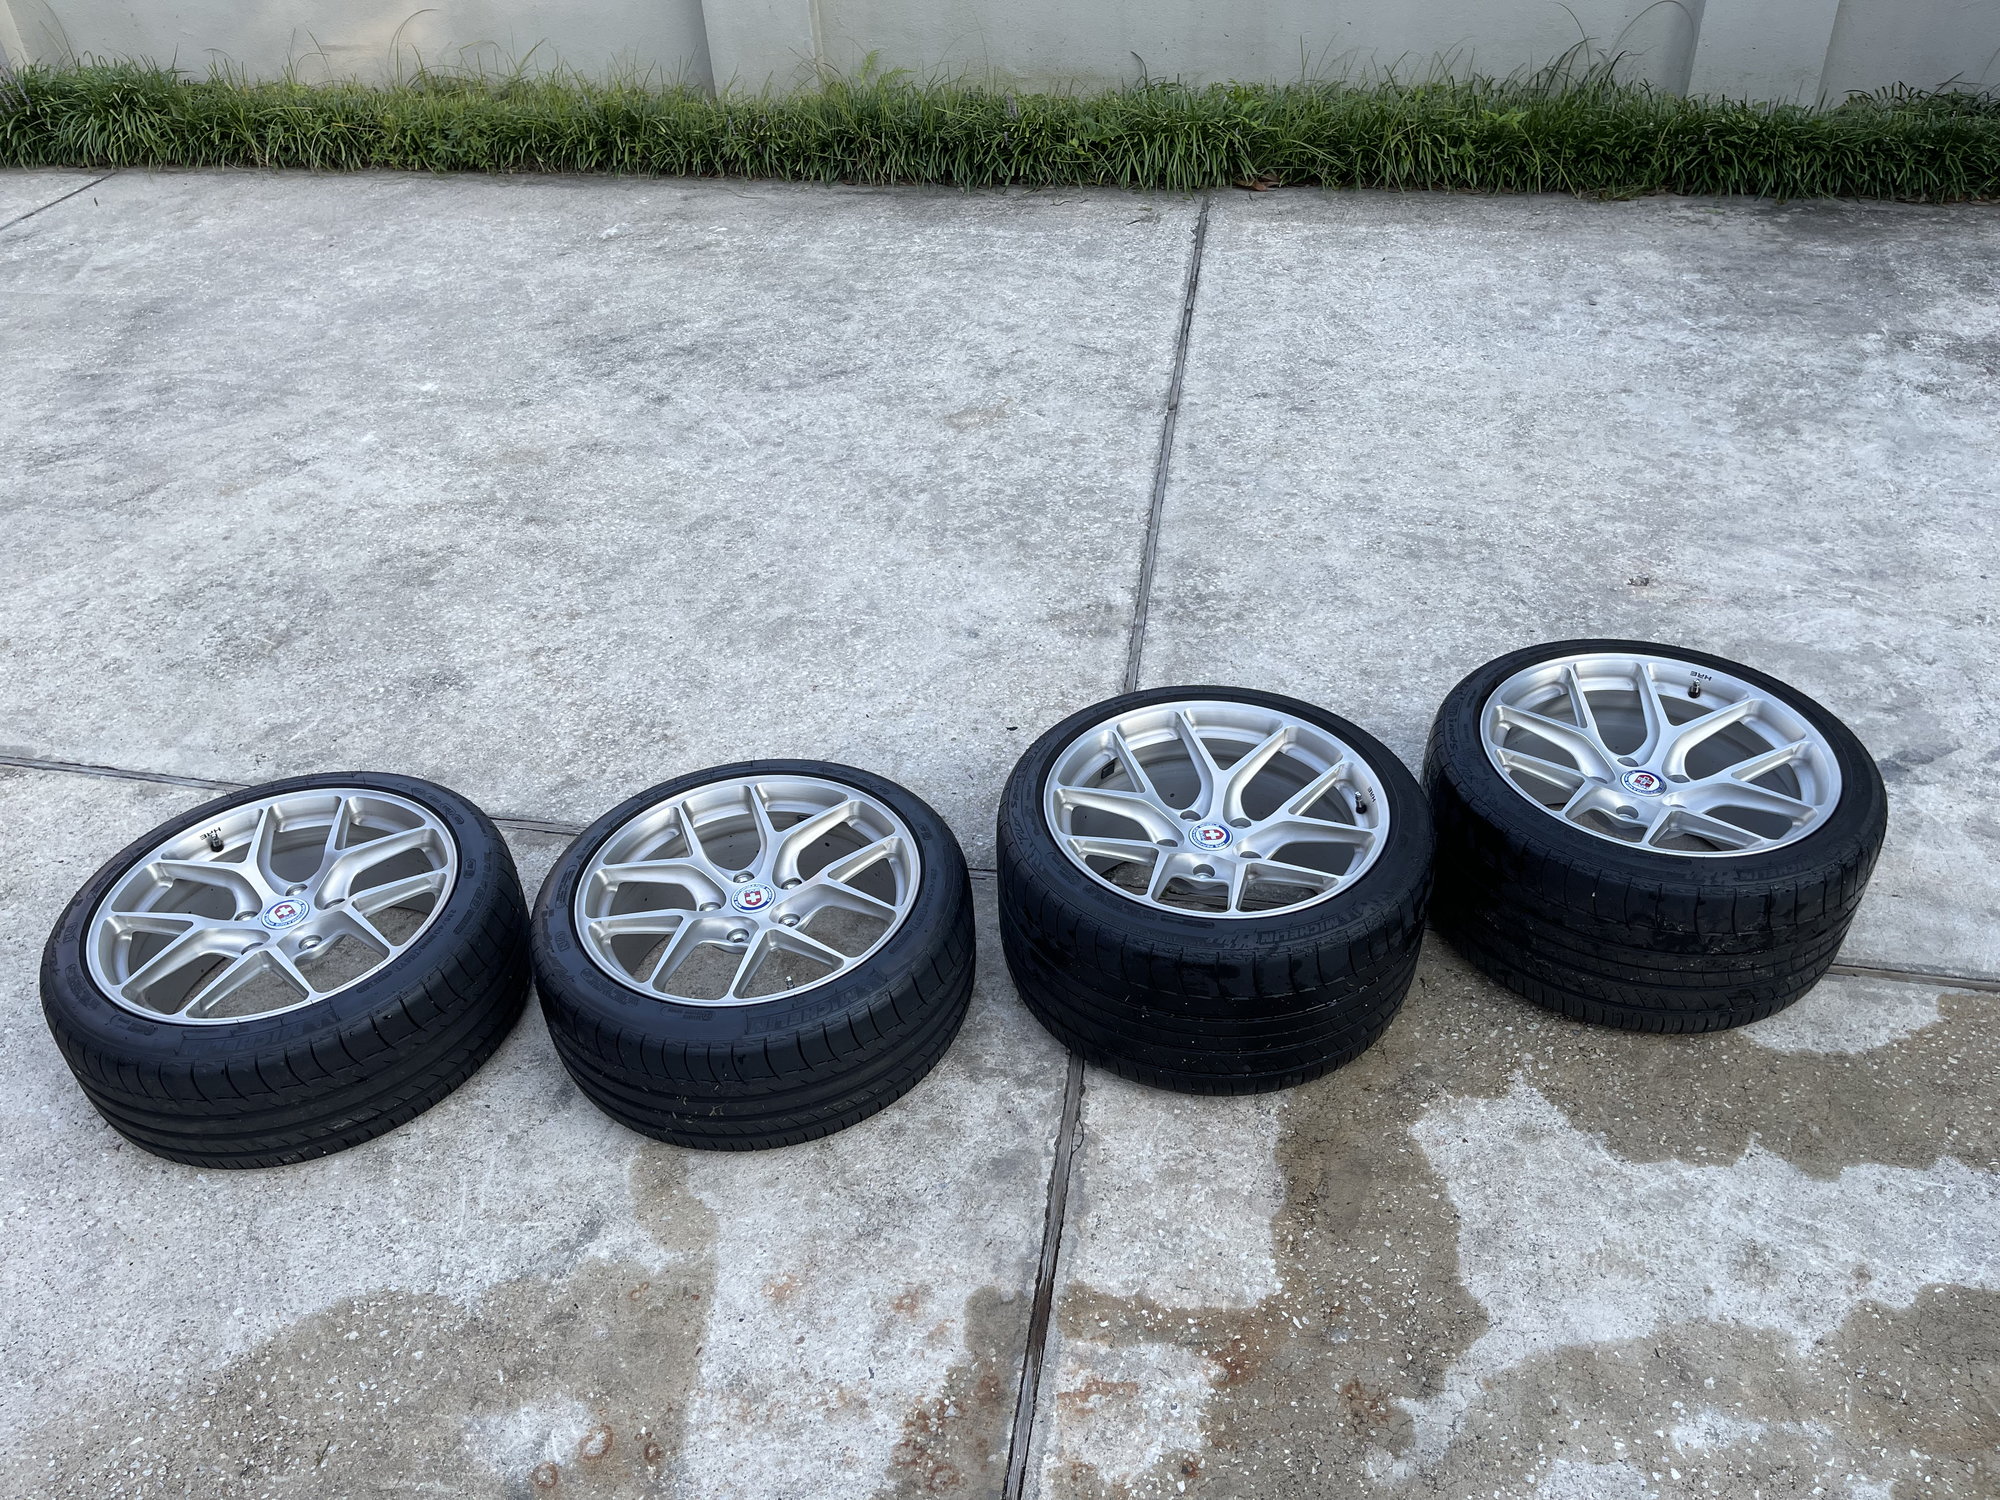 Wheels and Tires/Axles - 18" HRE R101 ultralight weight wheels w/Michelin PS2 tires - Used - 1995 to 1998 Porsche 911 - 2001 to 2005 Porsche 911 - Mobile, AL AL, United States